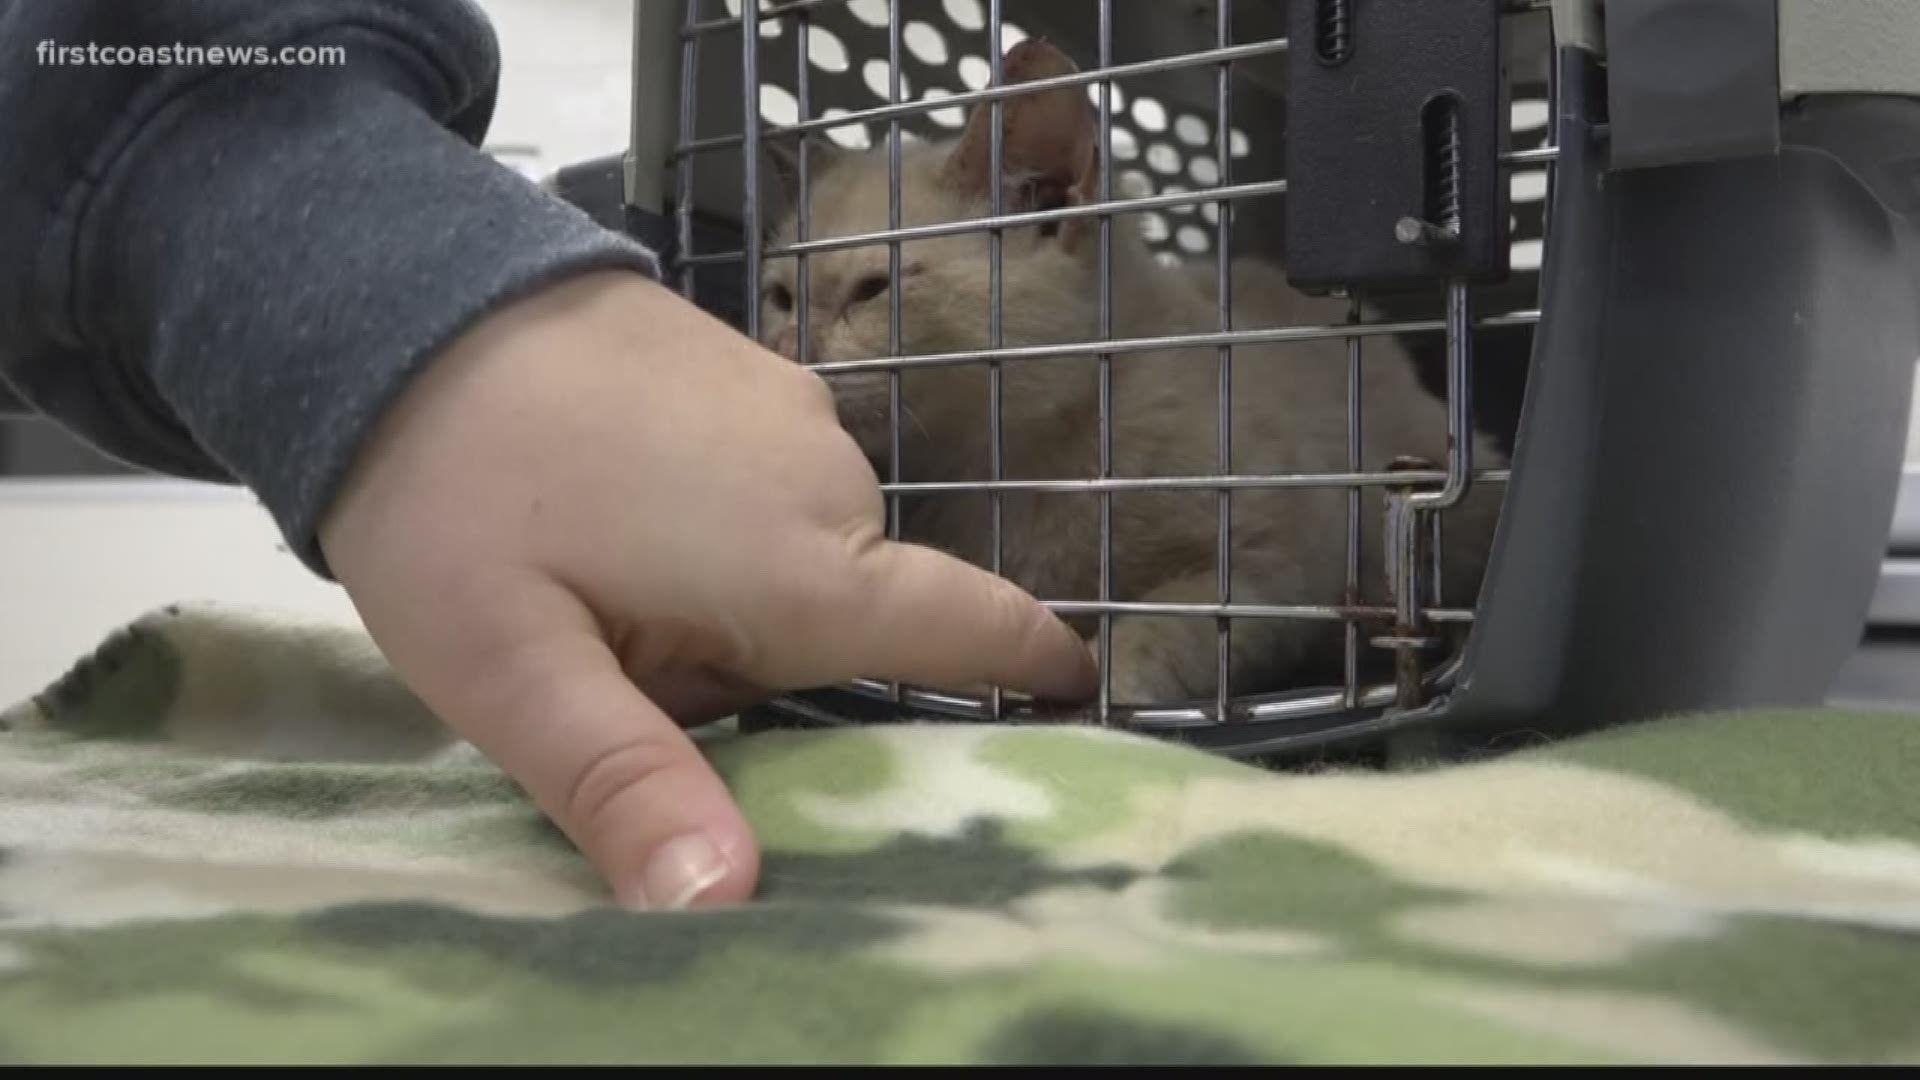 The Jacksonville Humane Society is taking in several animals that were displaced during the hurricane.